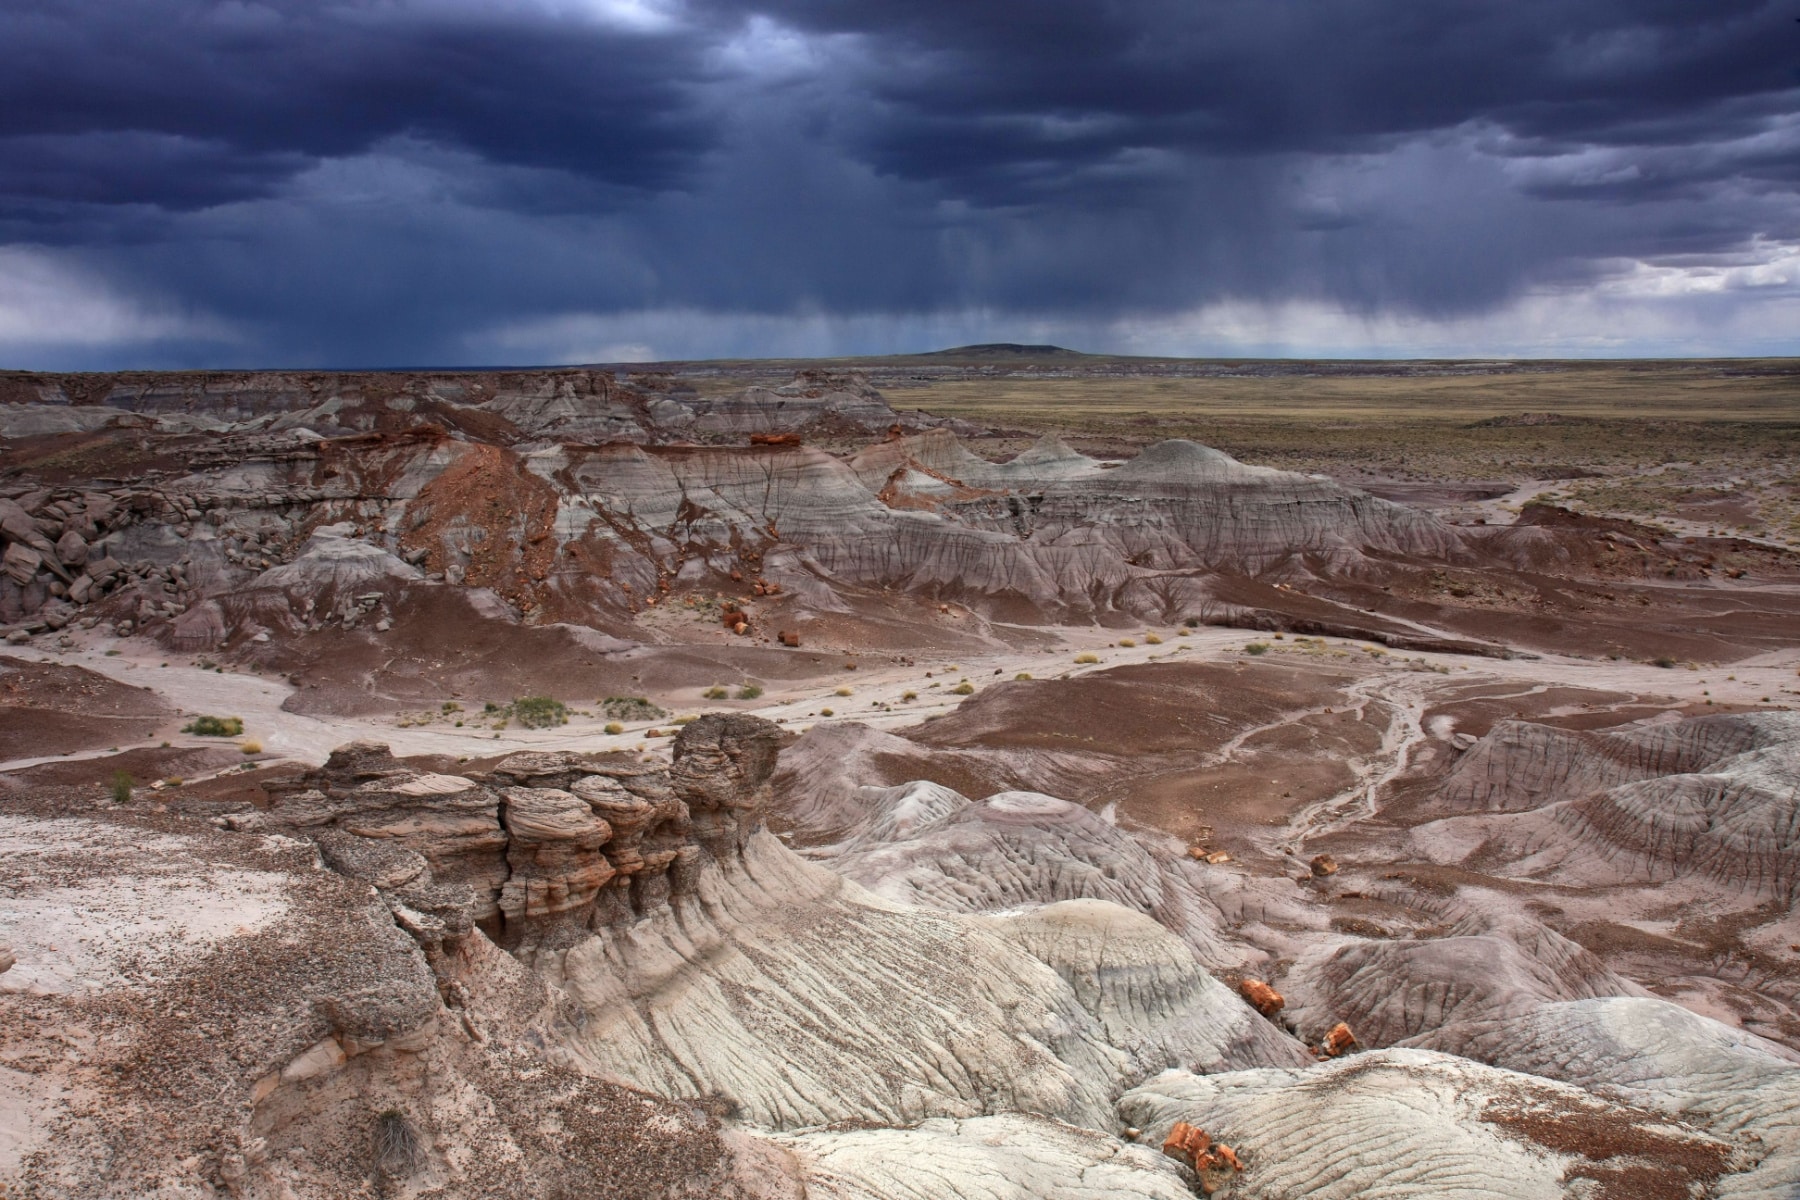 Dark clouds and rain shafts over the horizon in the mountains of Petrified Forest National Park.